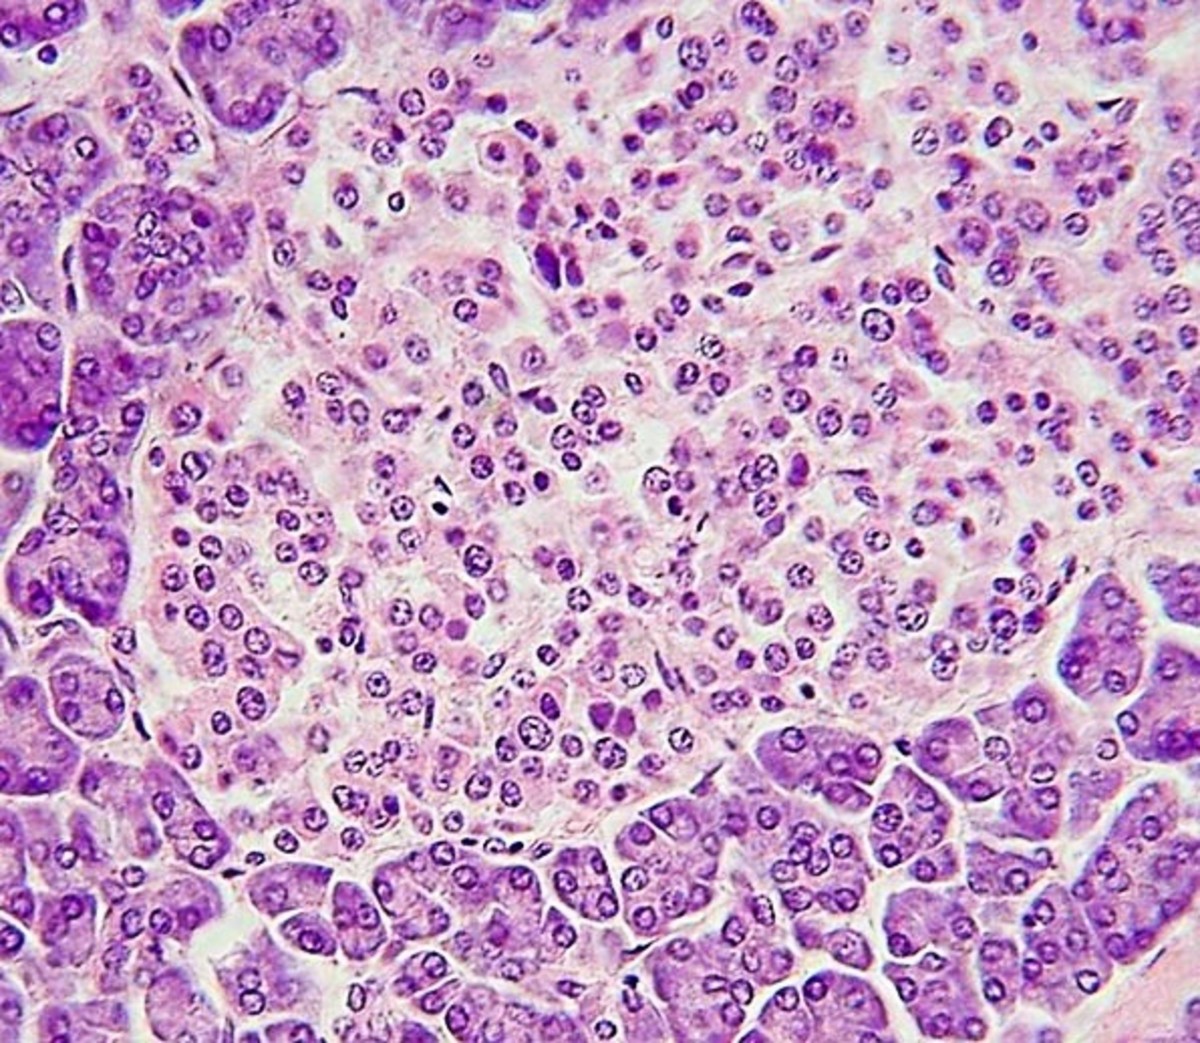 An islet of Langerhans (the paler area) in a stained sample